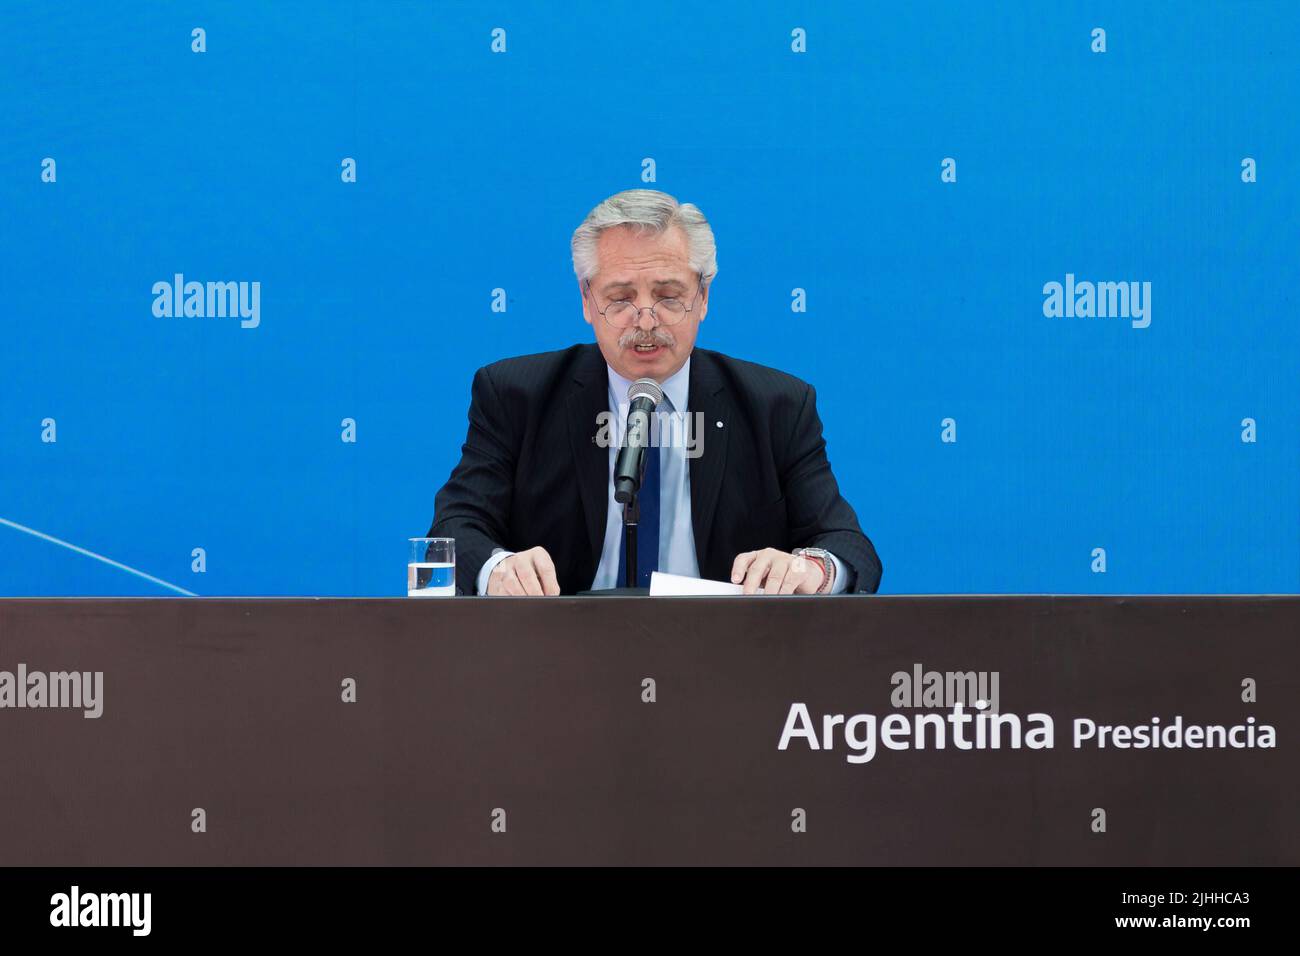 Buenos Aires, Argentina, 18th July 2022. President Alberto Fernández led the presentation of Argentina Grande, Infrastructure Plan for the Development of the Nation, together with the Minister of Public Works, Gabriel Katopodis. (Credit: Esteban Osorio/Alamy Live News) Stock Photo